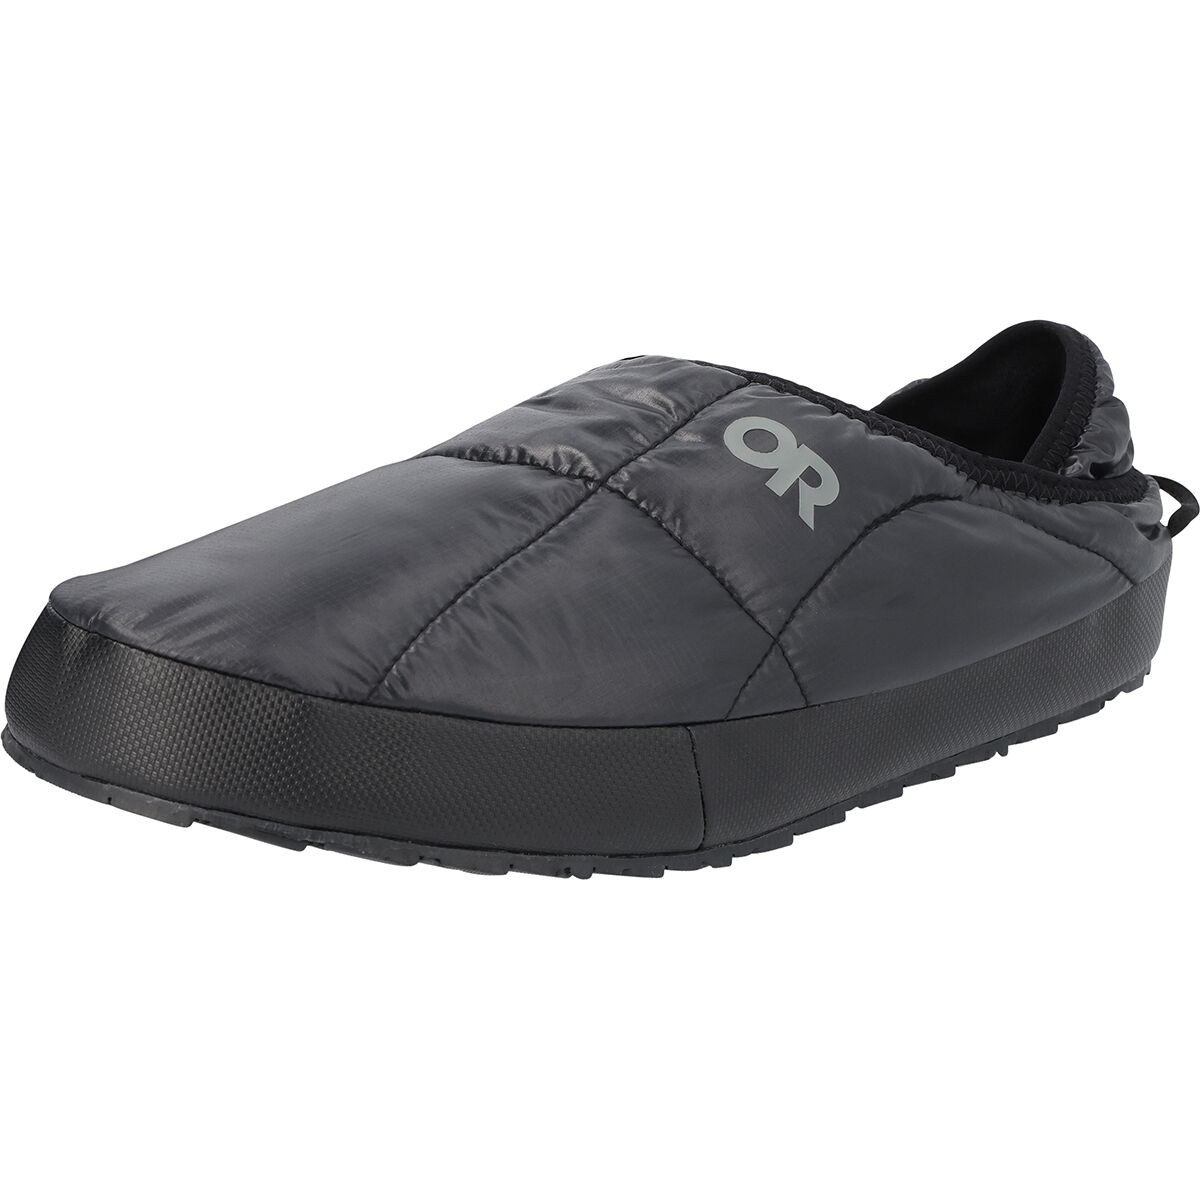 Outdoor Research Tundra Trax Slip-On Booties - Men's